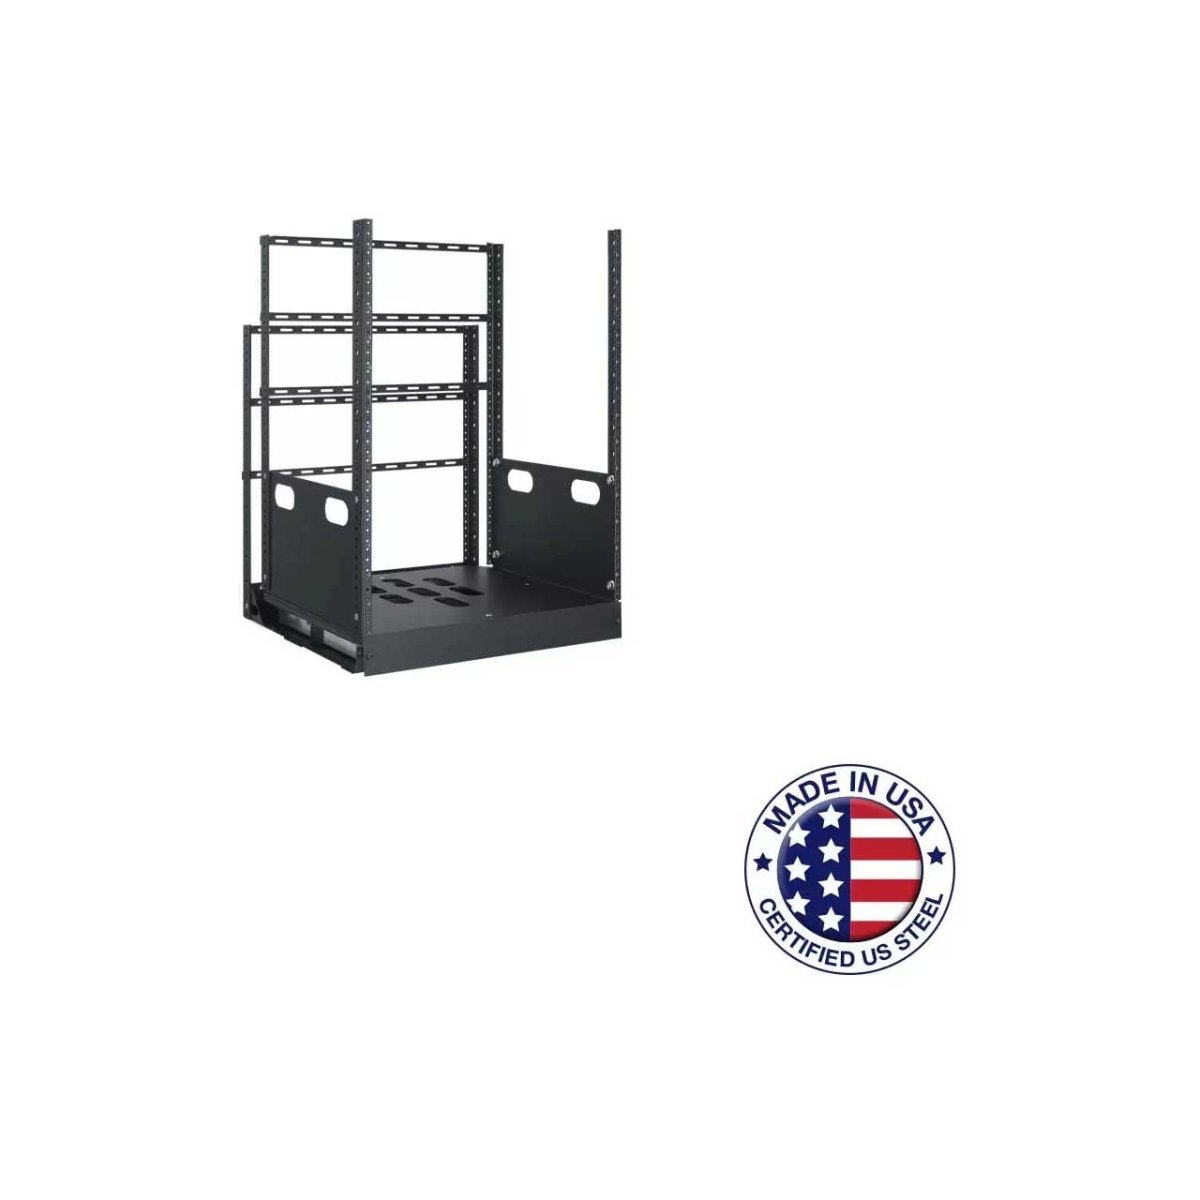 Picture of Lowell Manufacturing LMC-LPTR4-1419 LPTR4-1419 14RU Pull & Turn Millwork Rack with Four Support Rails - 19 in. Deep